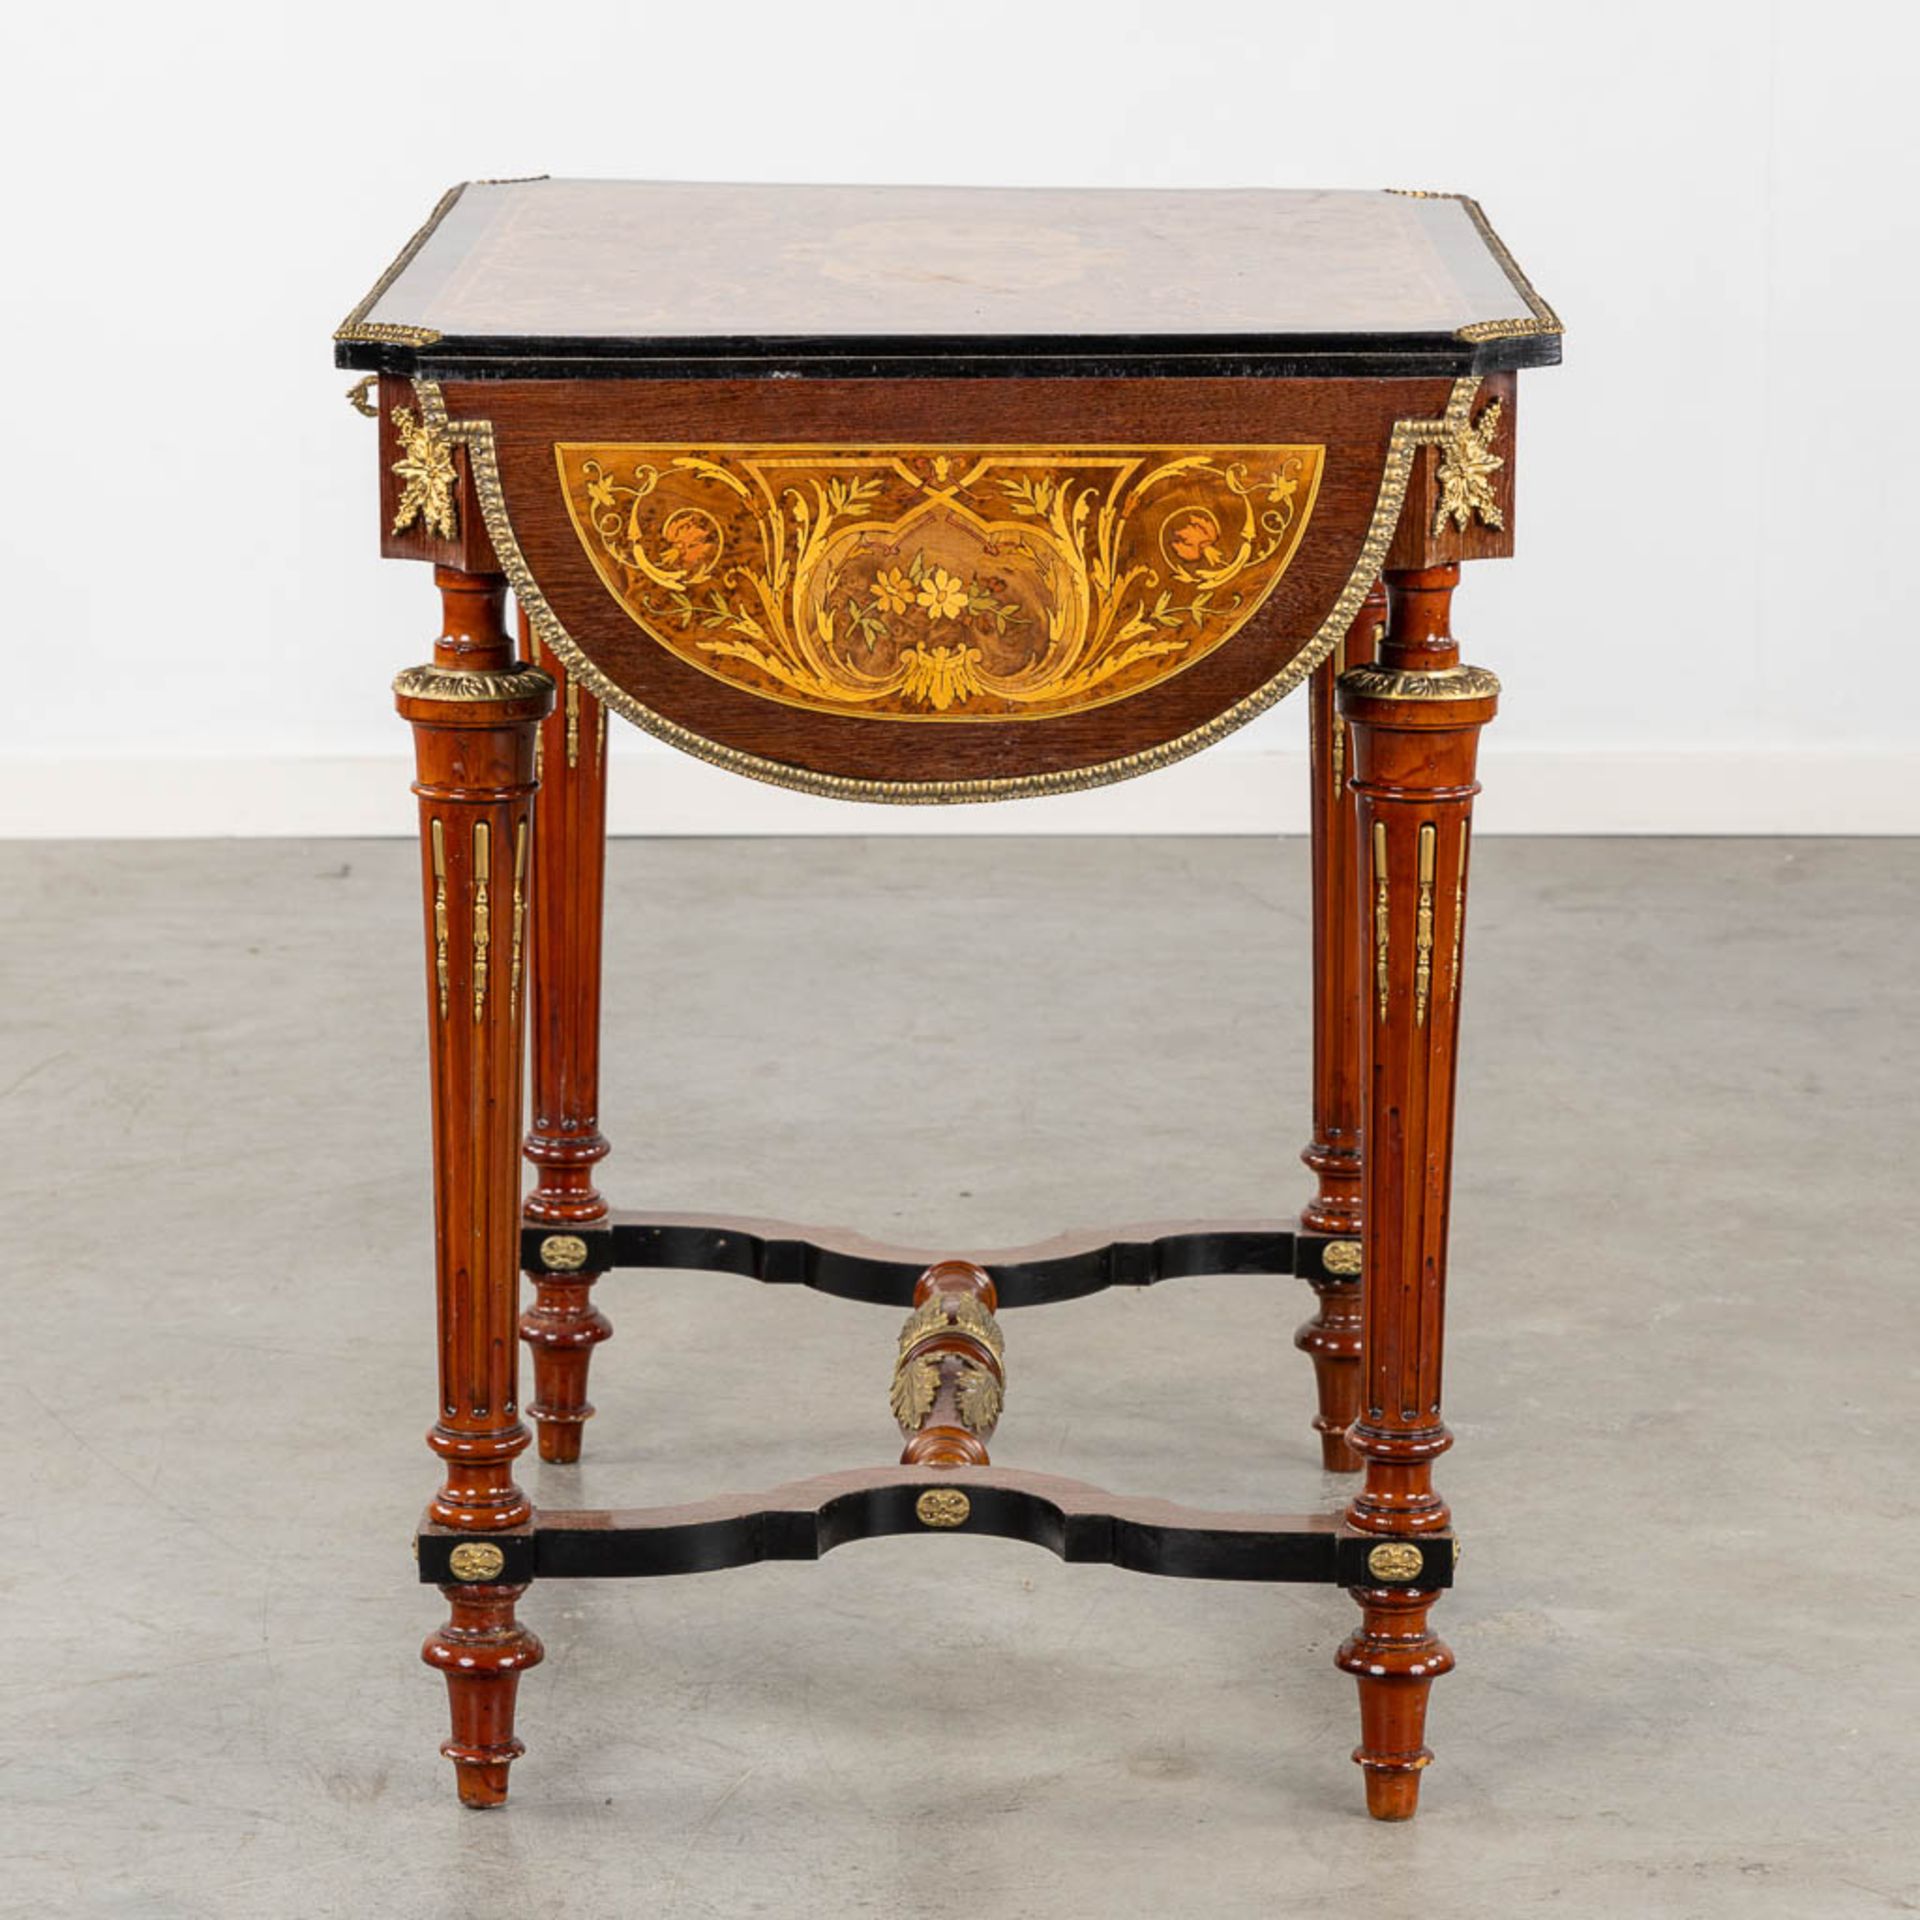 A side table/play table, marquetry inlay and mounted with bronze. 20th C. (L:57 x W:115 x H:74 cm) - Bild 6 aus 19